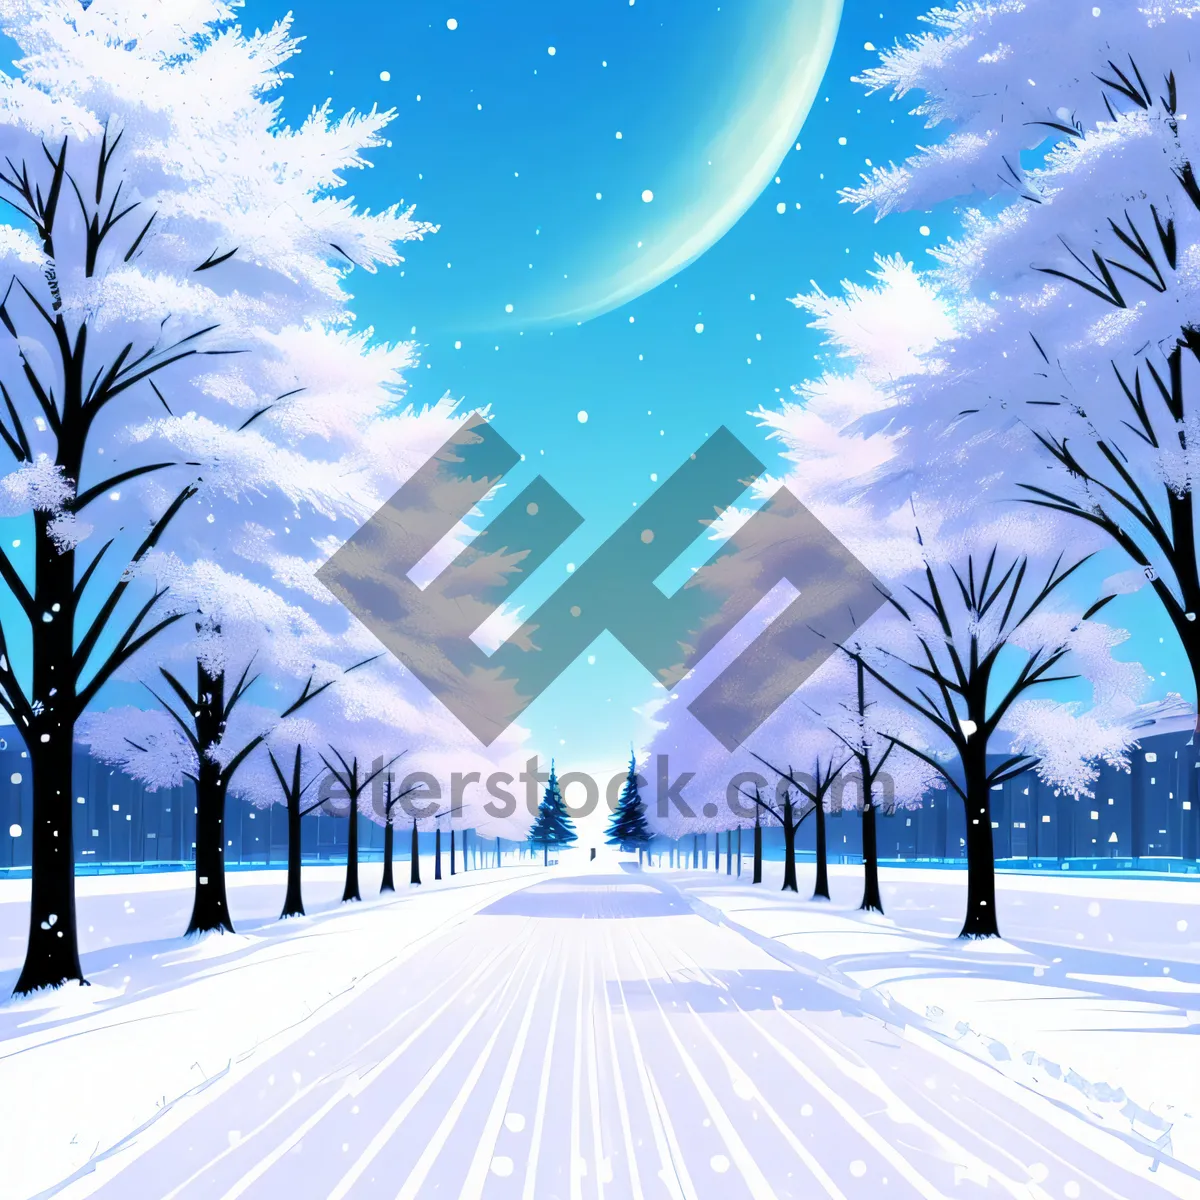 Picture of Starry Winter Wonderland: Bright Snowy Holiday Art